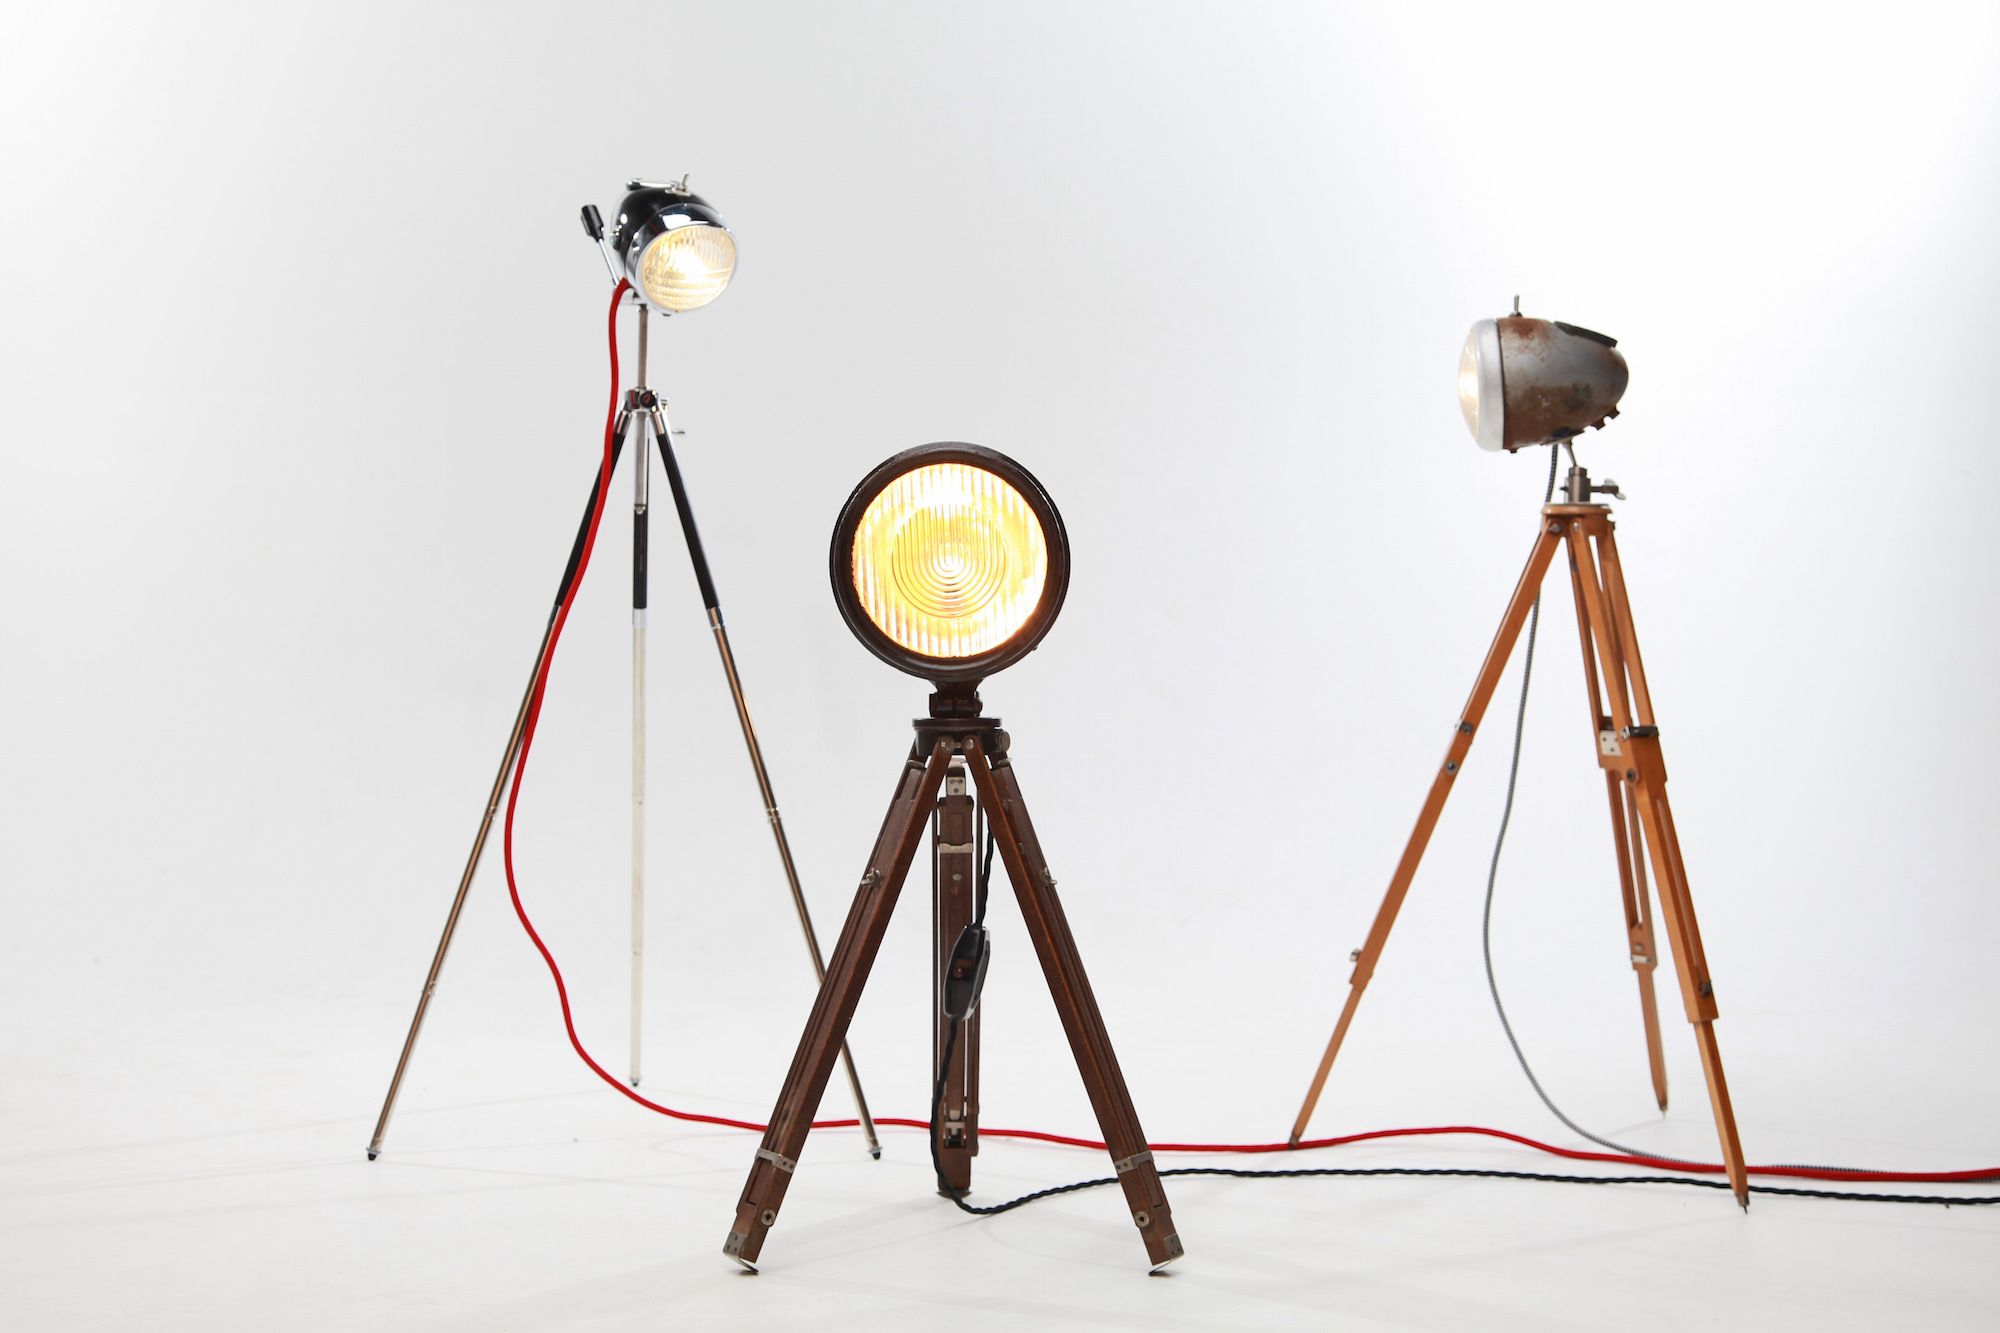 Otto Lamp by Urban Light Factory | Urban, Lights and Townhouse